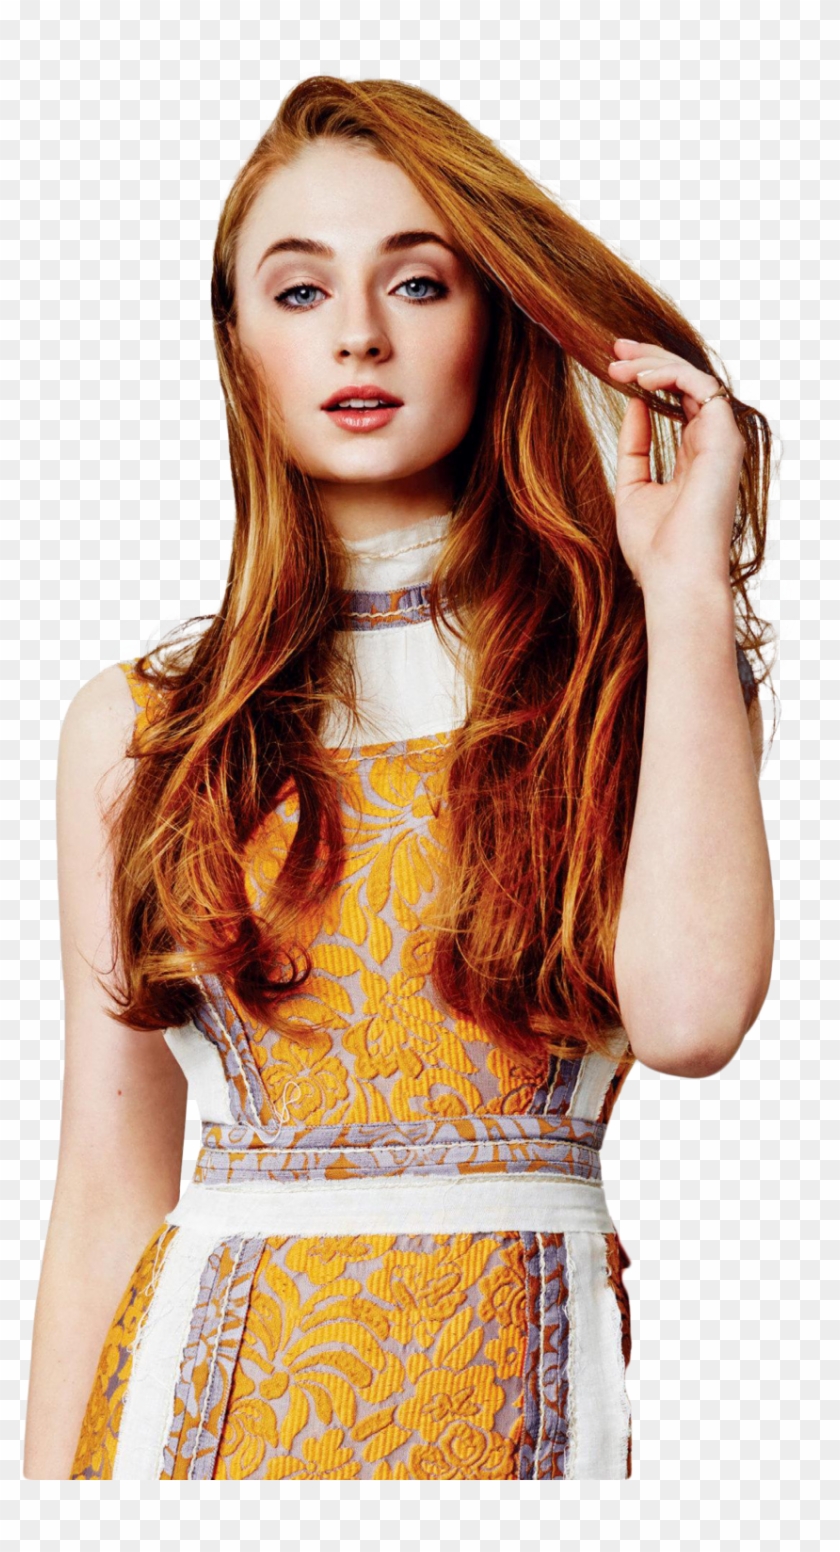 Sophie Turner Clipart - Sophie Turner Red Hair Photoshoot - Png Download #1767767